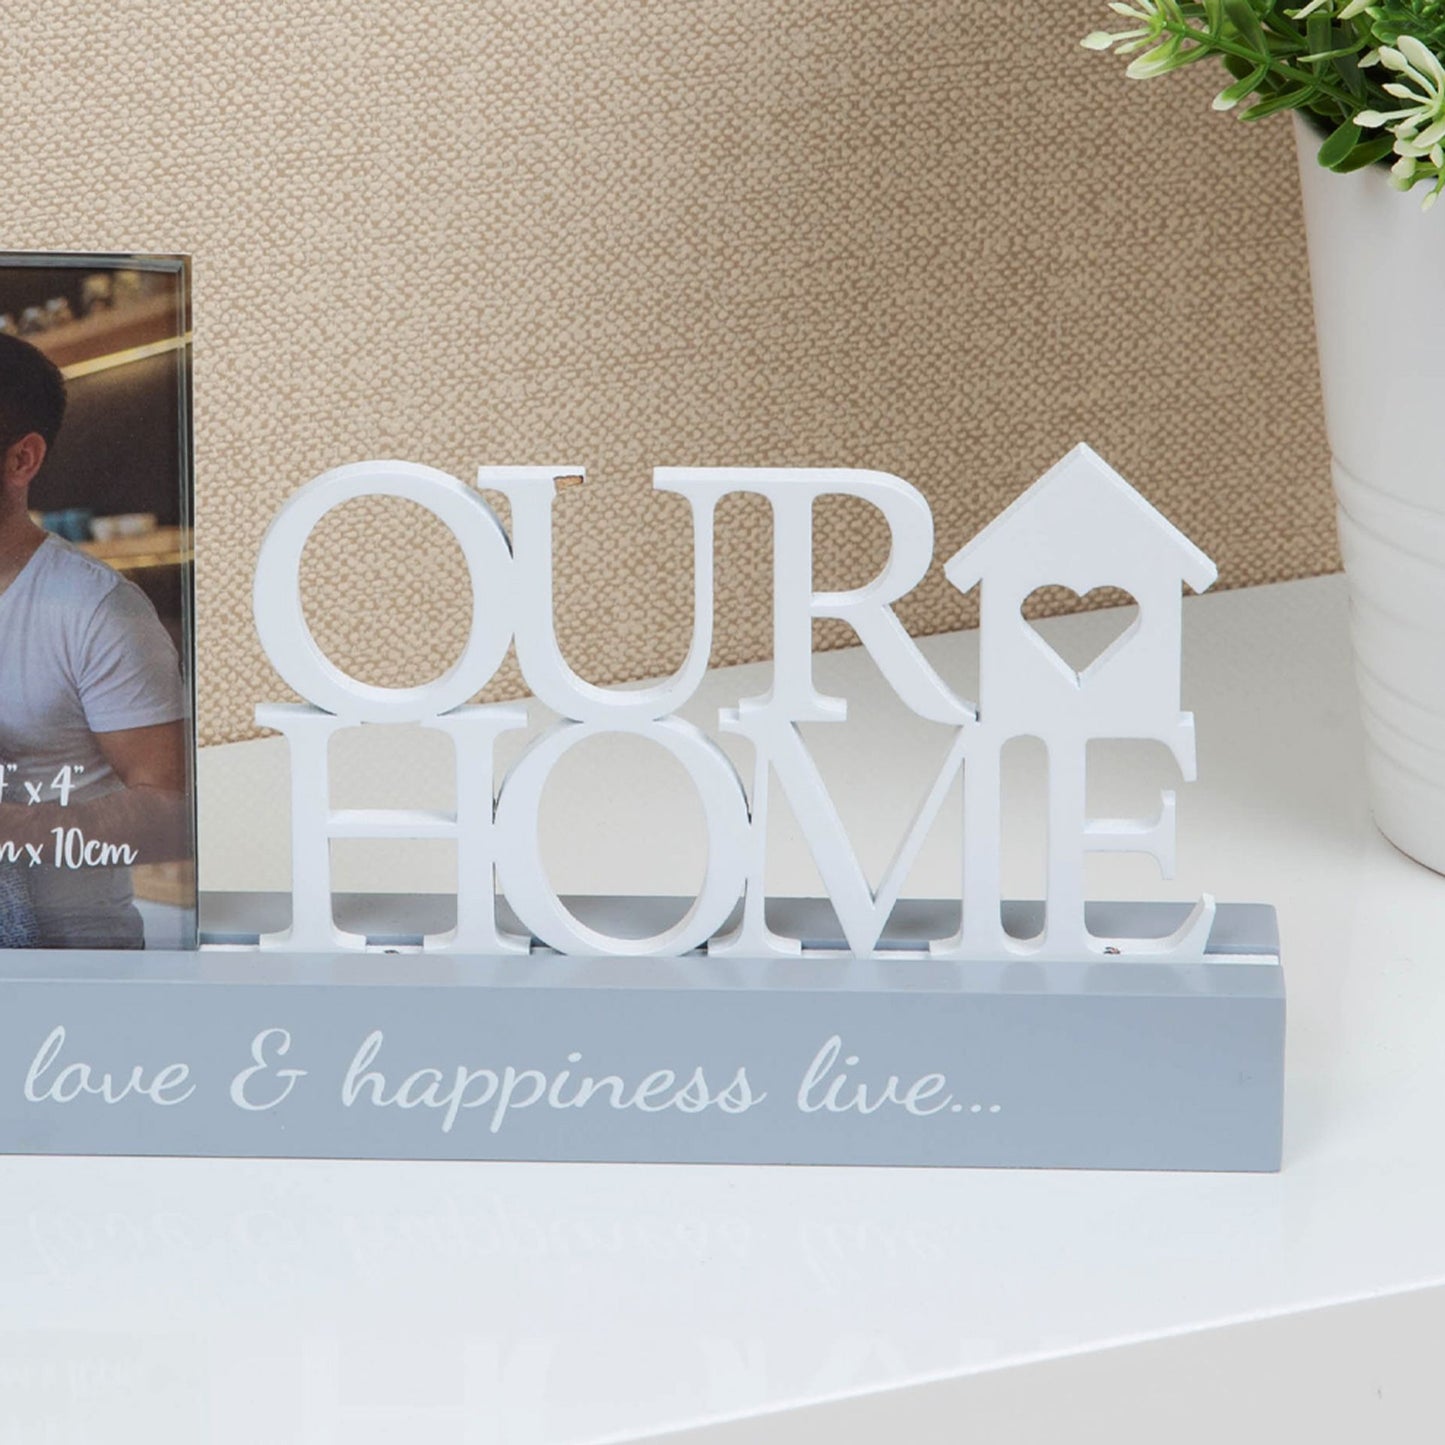 Celebrations Photo Frames | 4x4 Inch Photo Size | Our Home